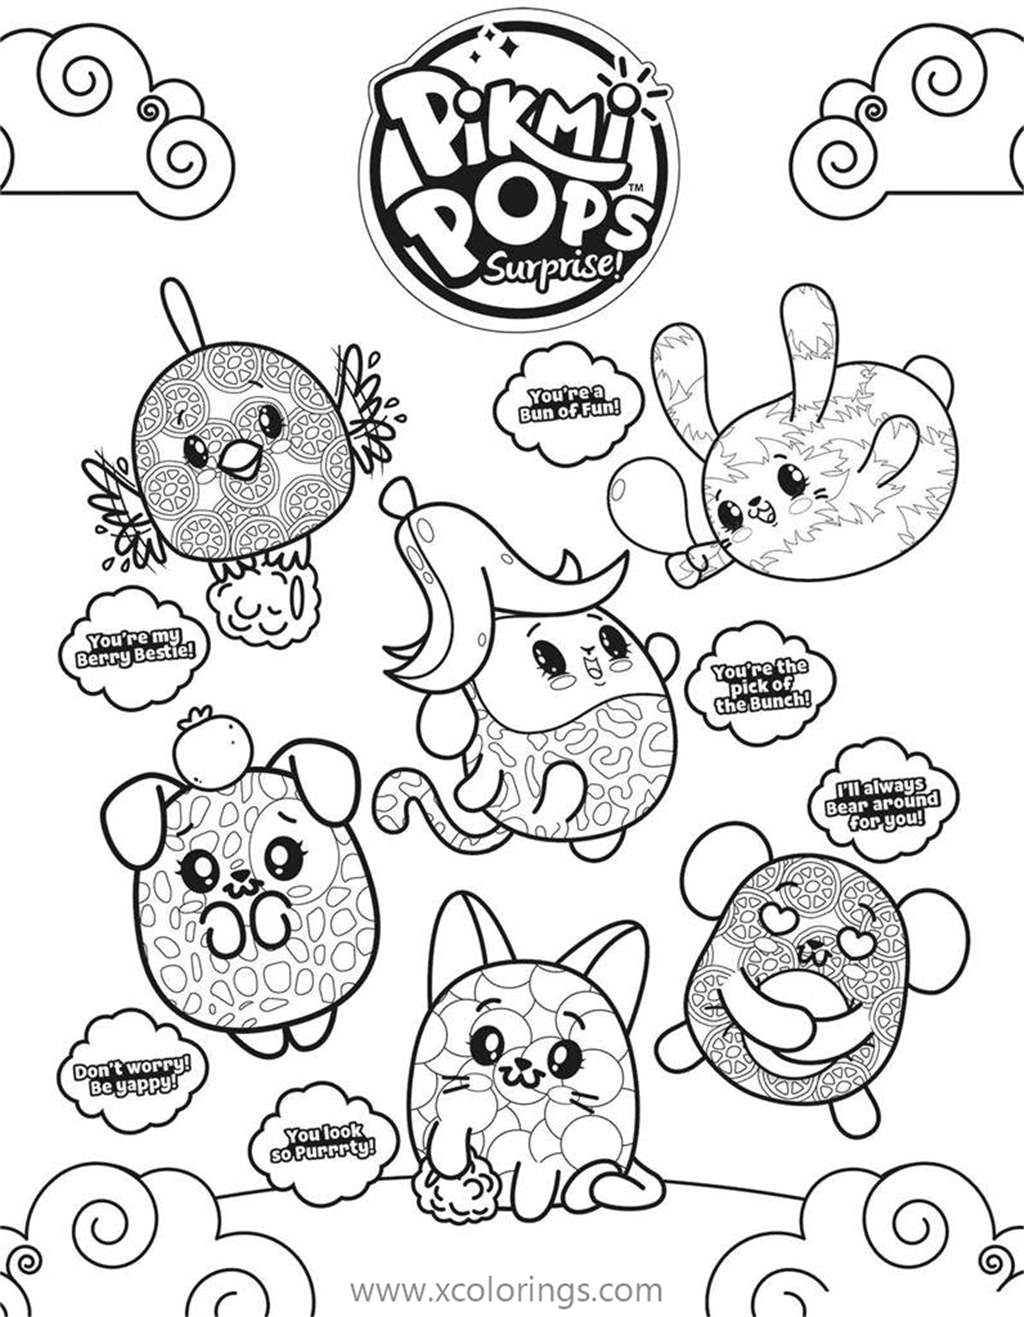 Free Pikmi Pops Characters Coloring Pages printable